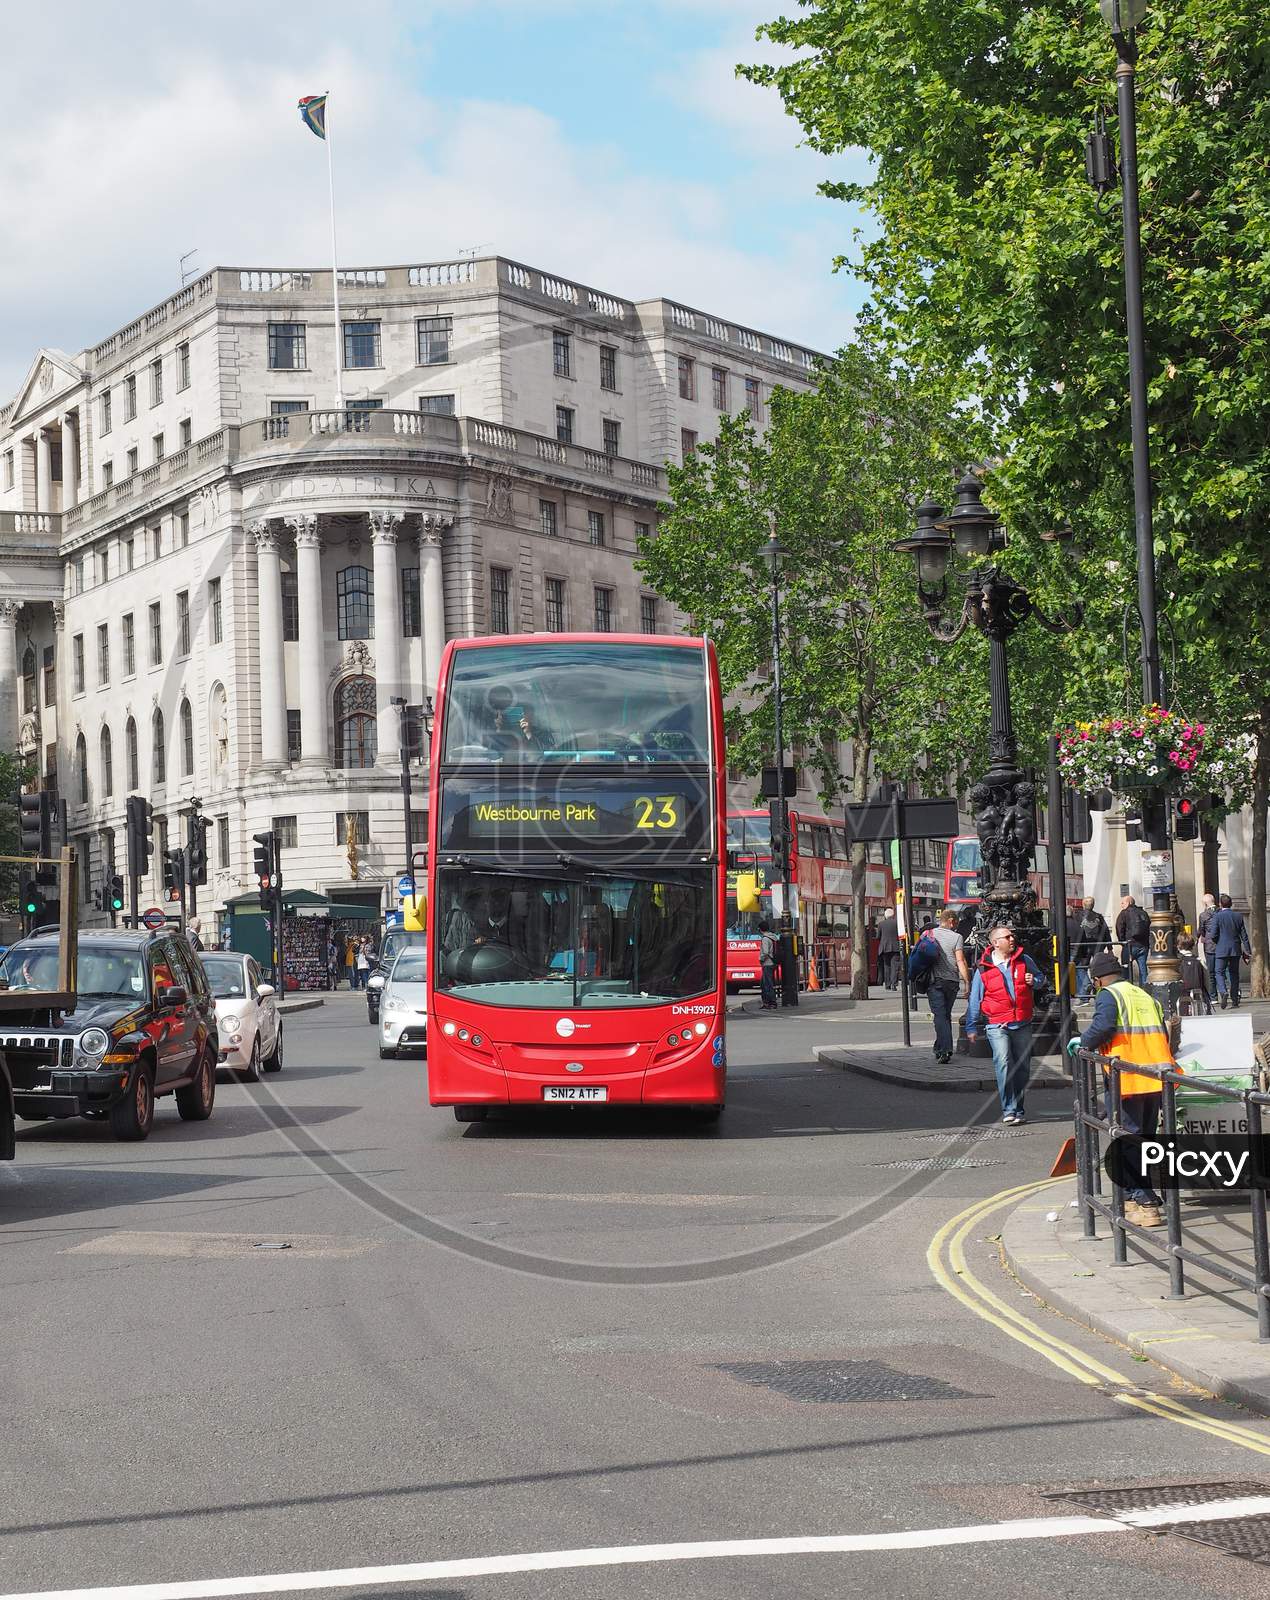 London, Uk - June 09, 2015: Red Double Decker Buses Are A Traditional Landmark Of London